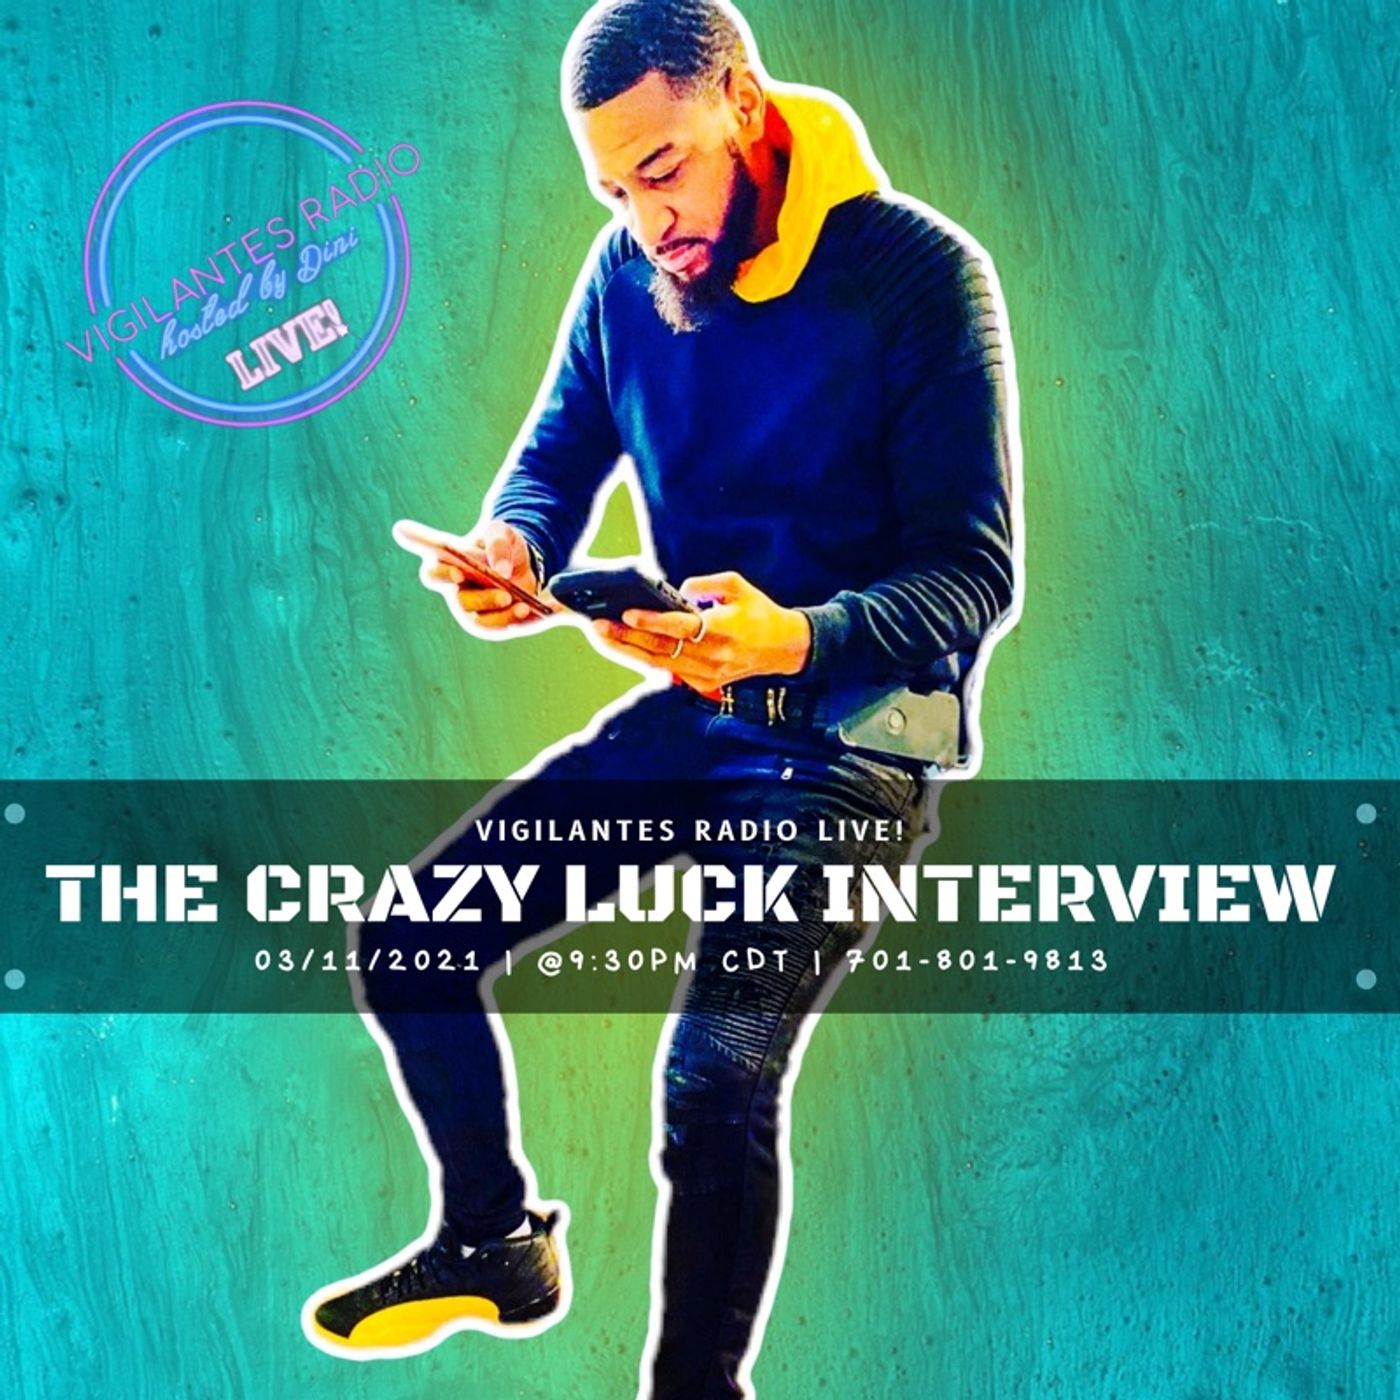 The CrazyLuck Interview. Image